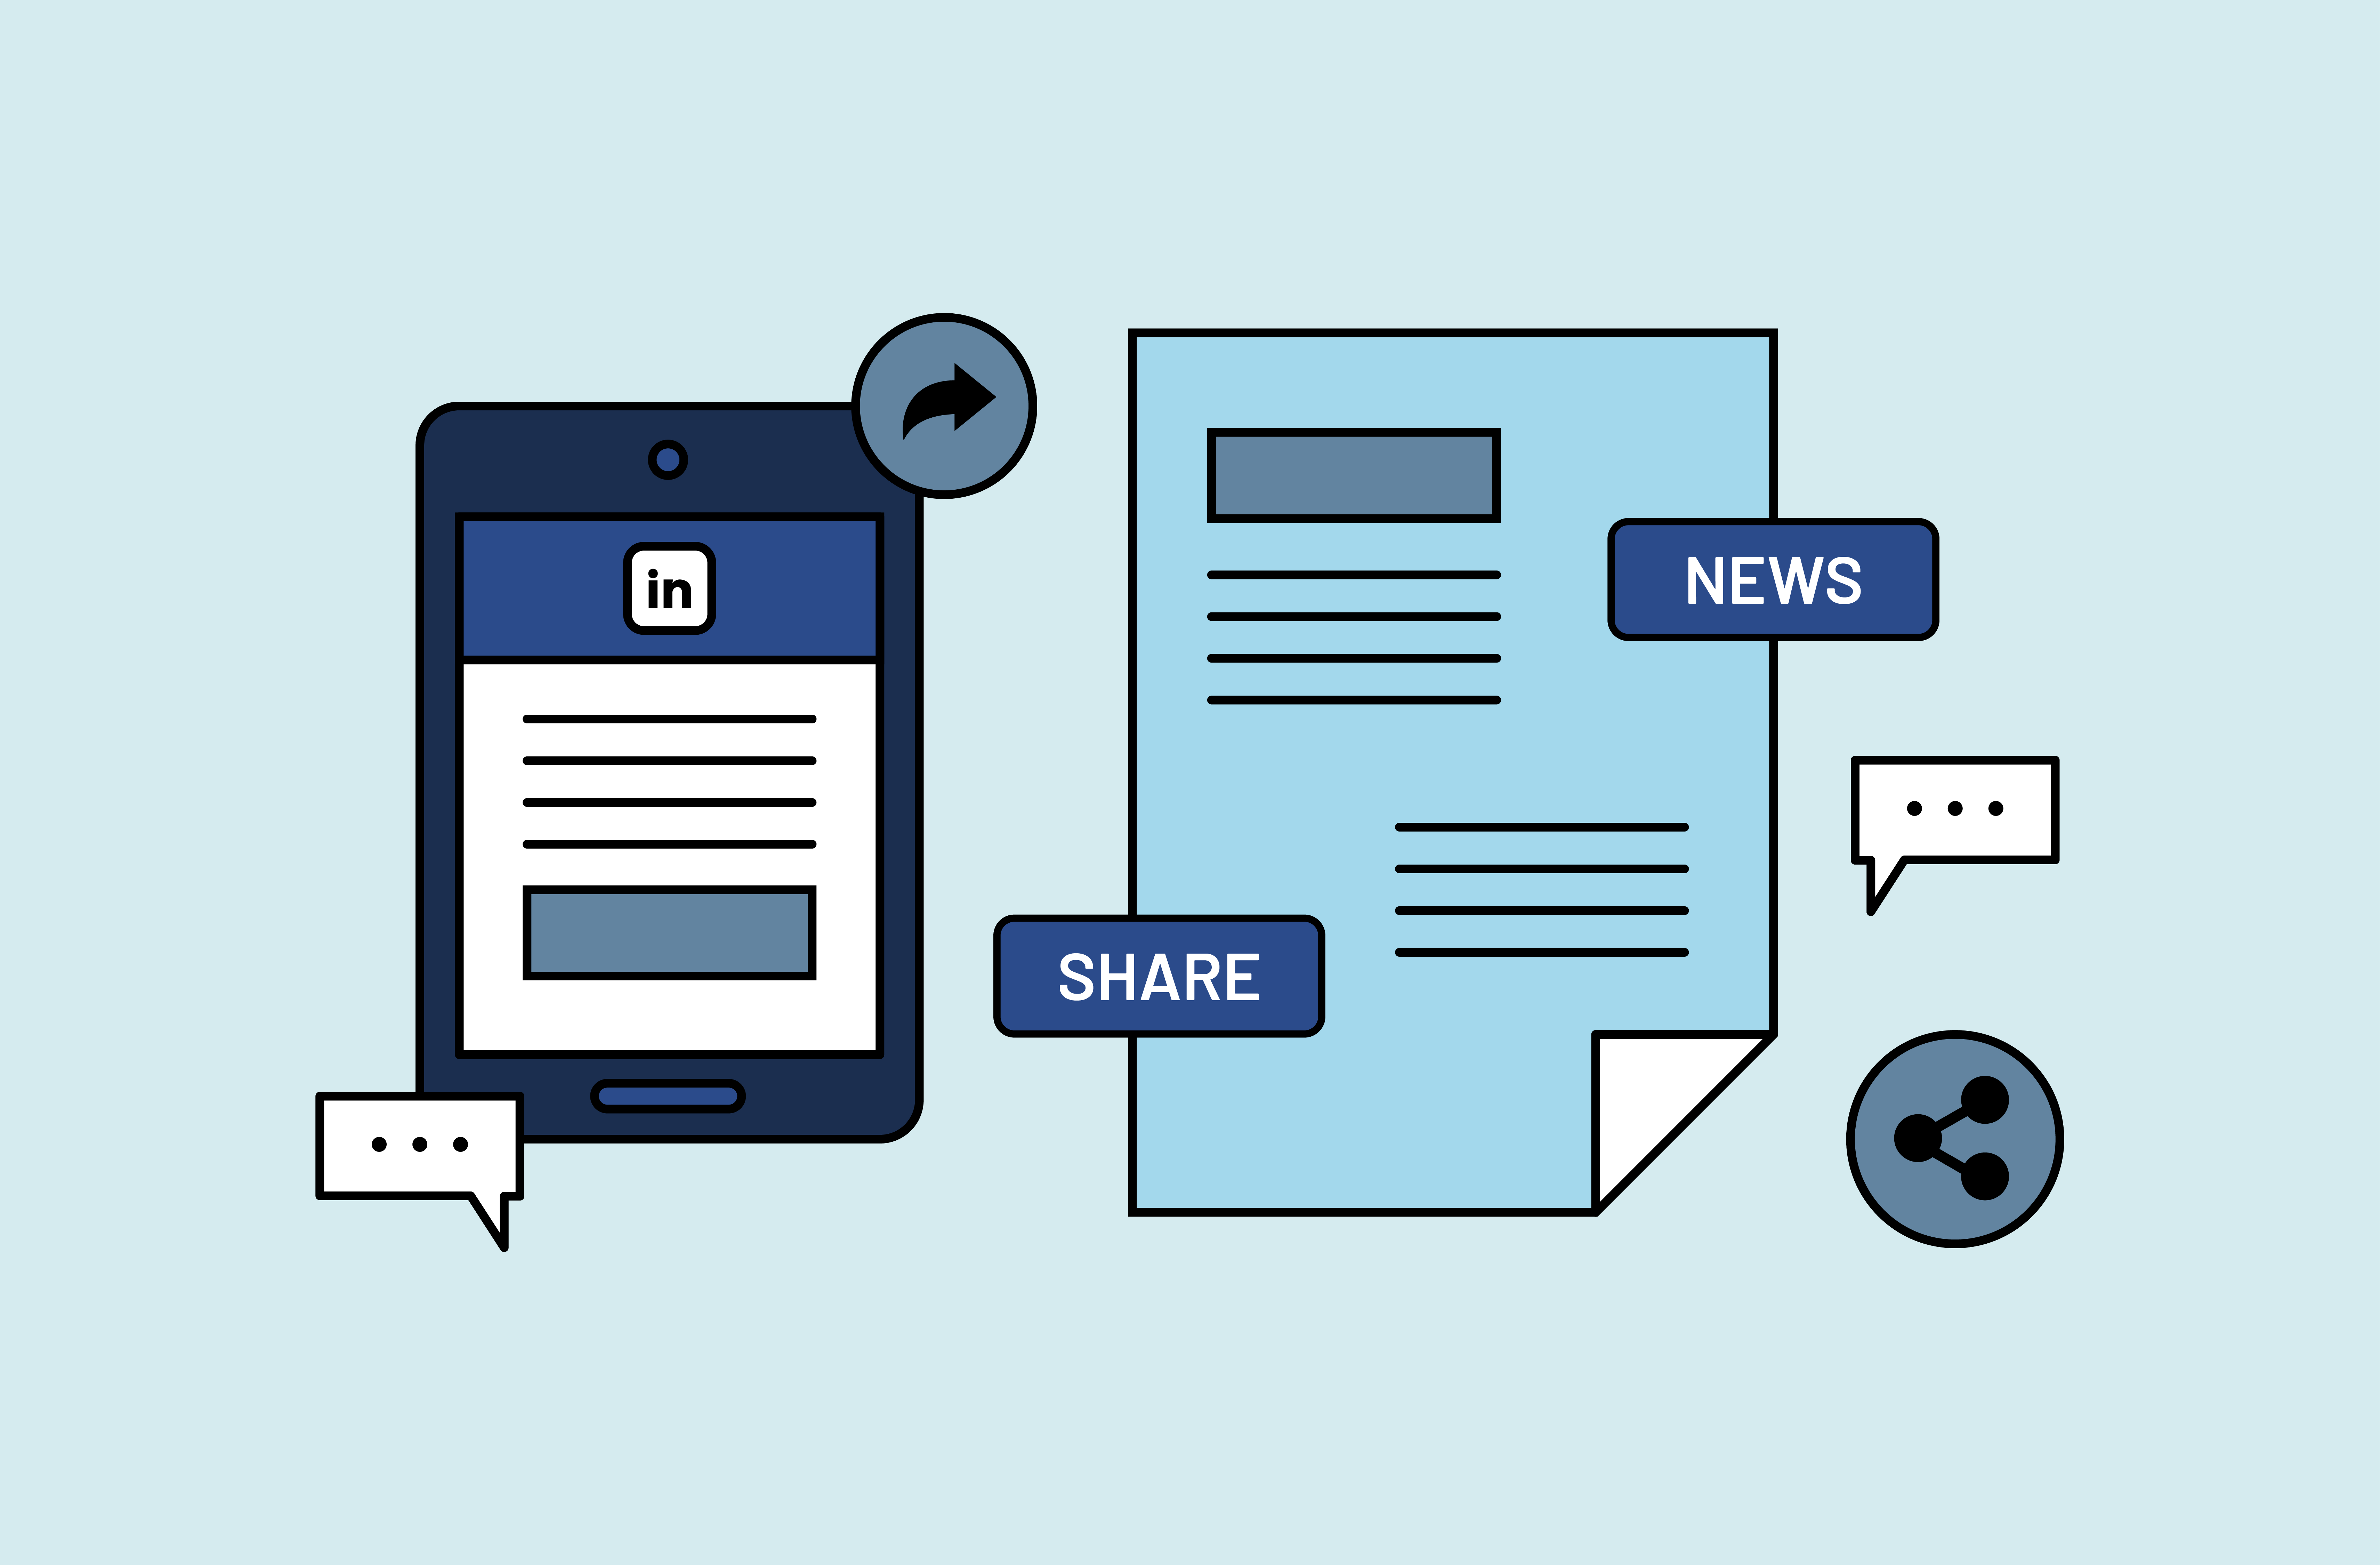 Leveraging LinkedIn- Unlocking the Potential for Newsrooms